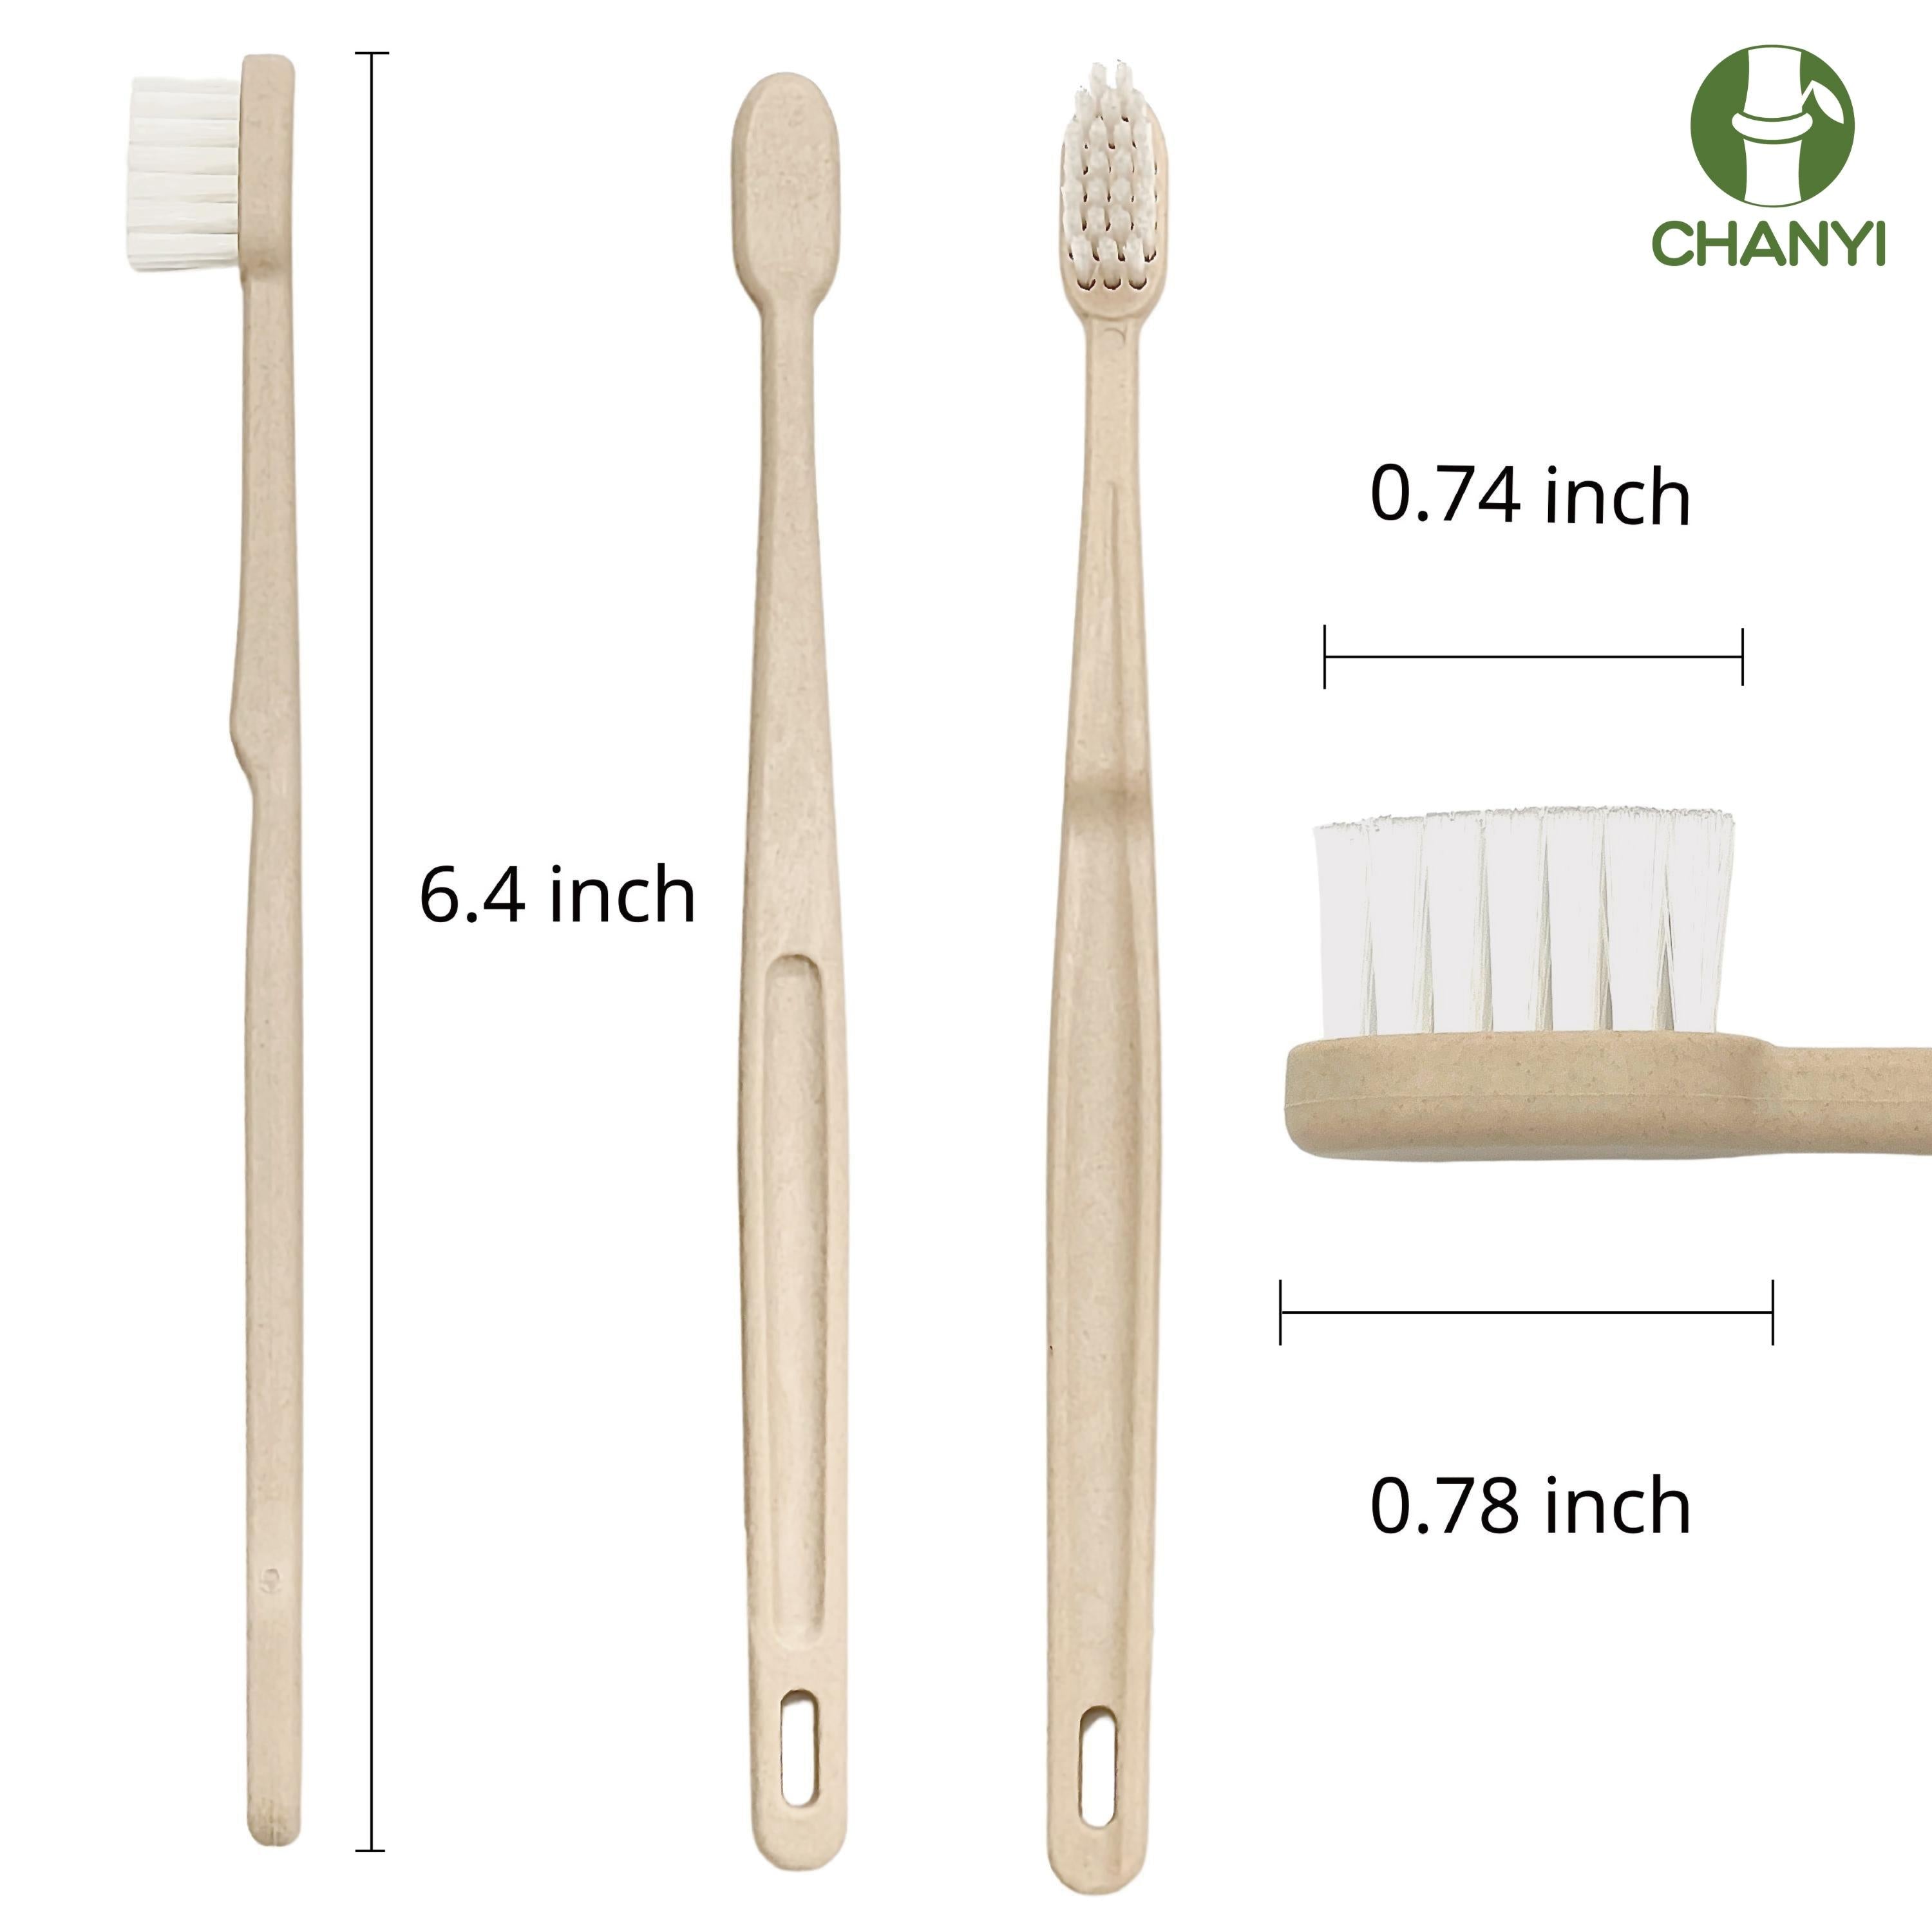 eco-friendly zero waste bamboo toothbrush vegan natural compostable wooden sustainable recyclable travel hotel kit manual green toothbrushes health - CHANYI eco